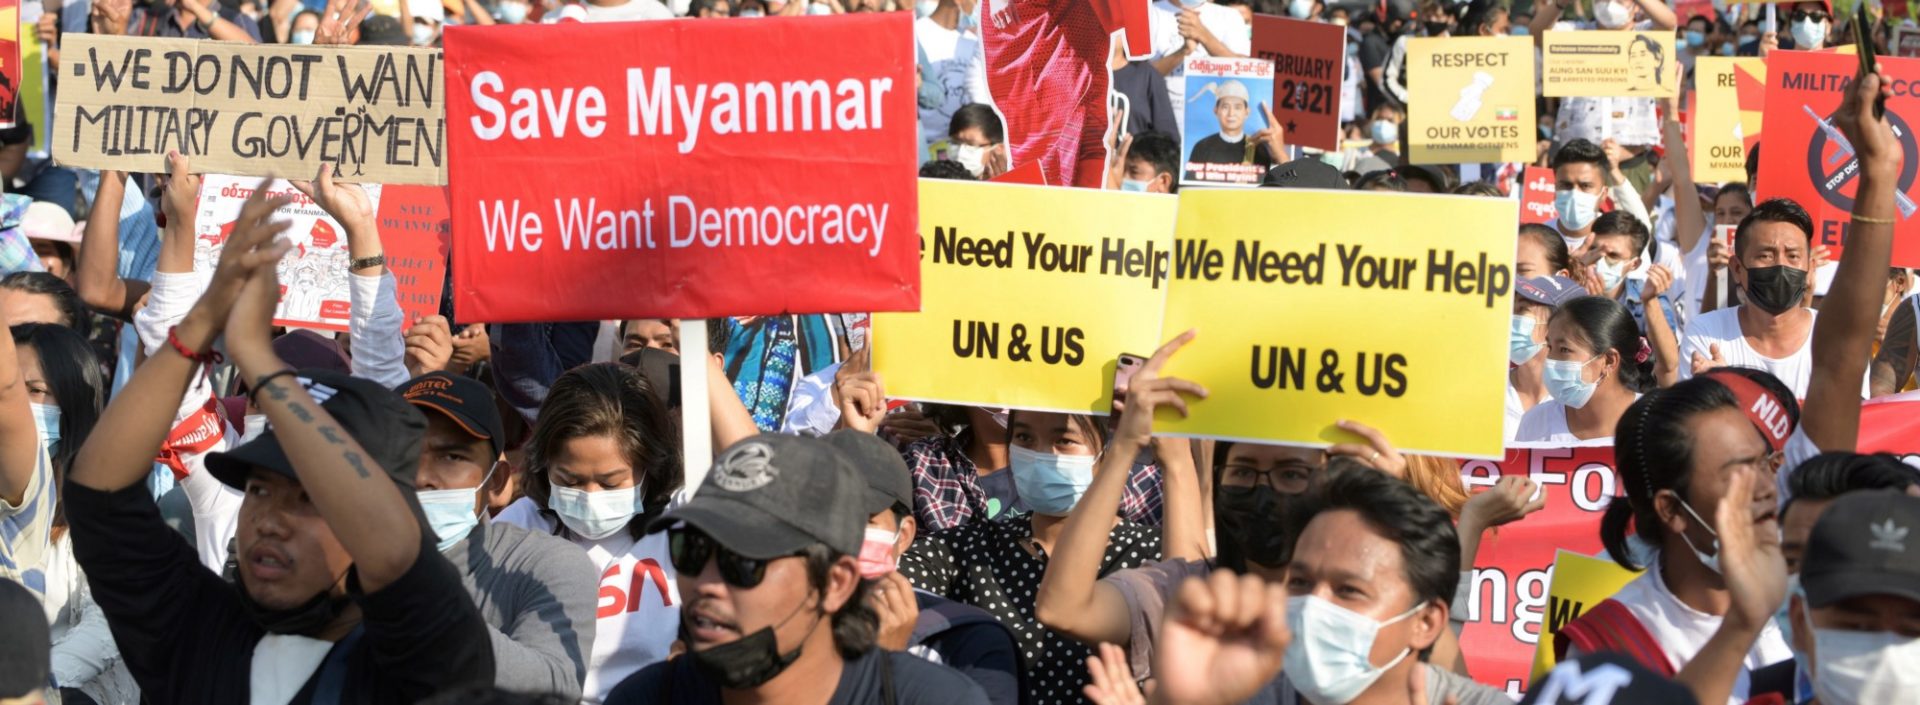 Demonstrators hold placards during a protest against the military coup in Yangon, Myanmar, February 15, 2021.